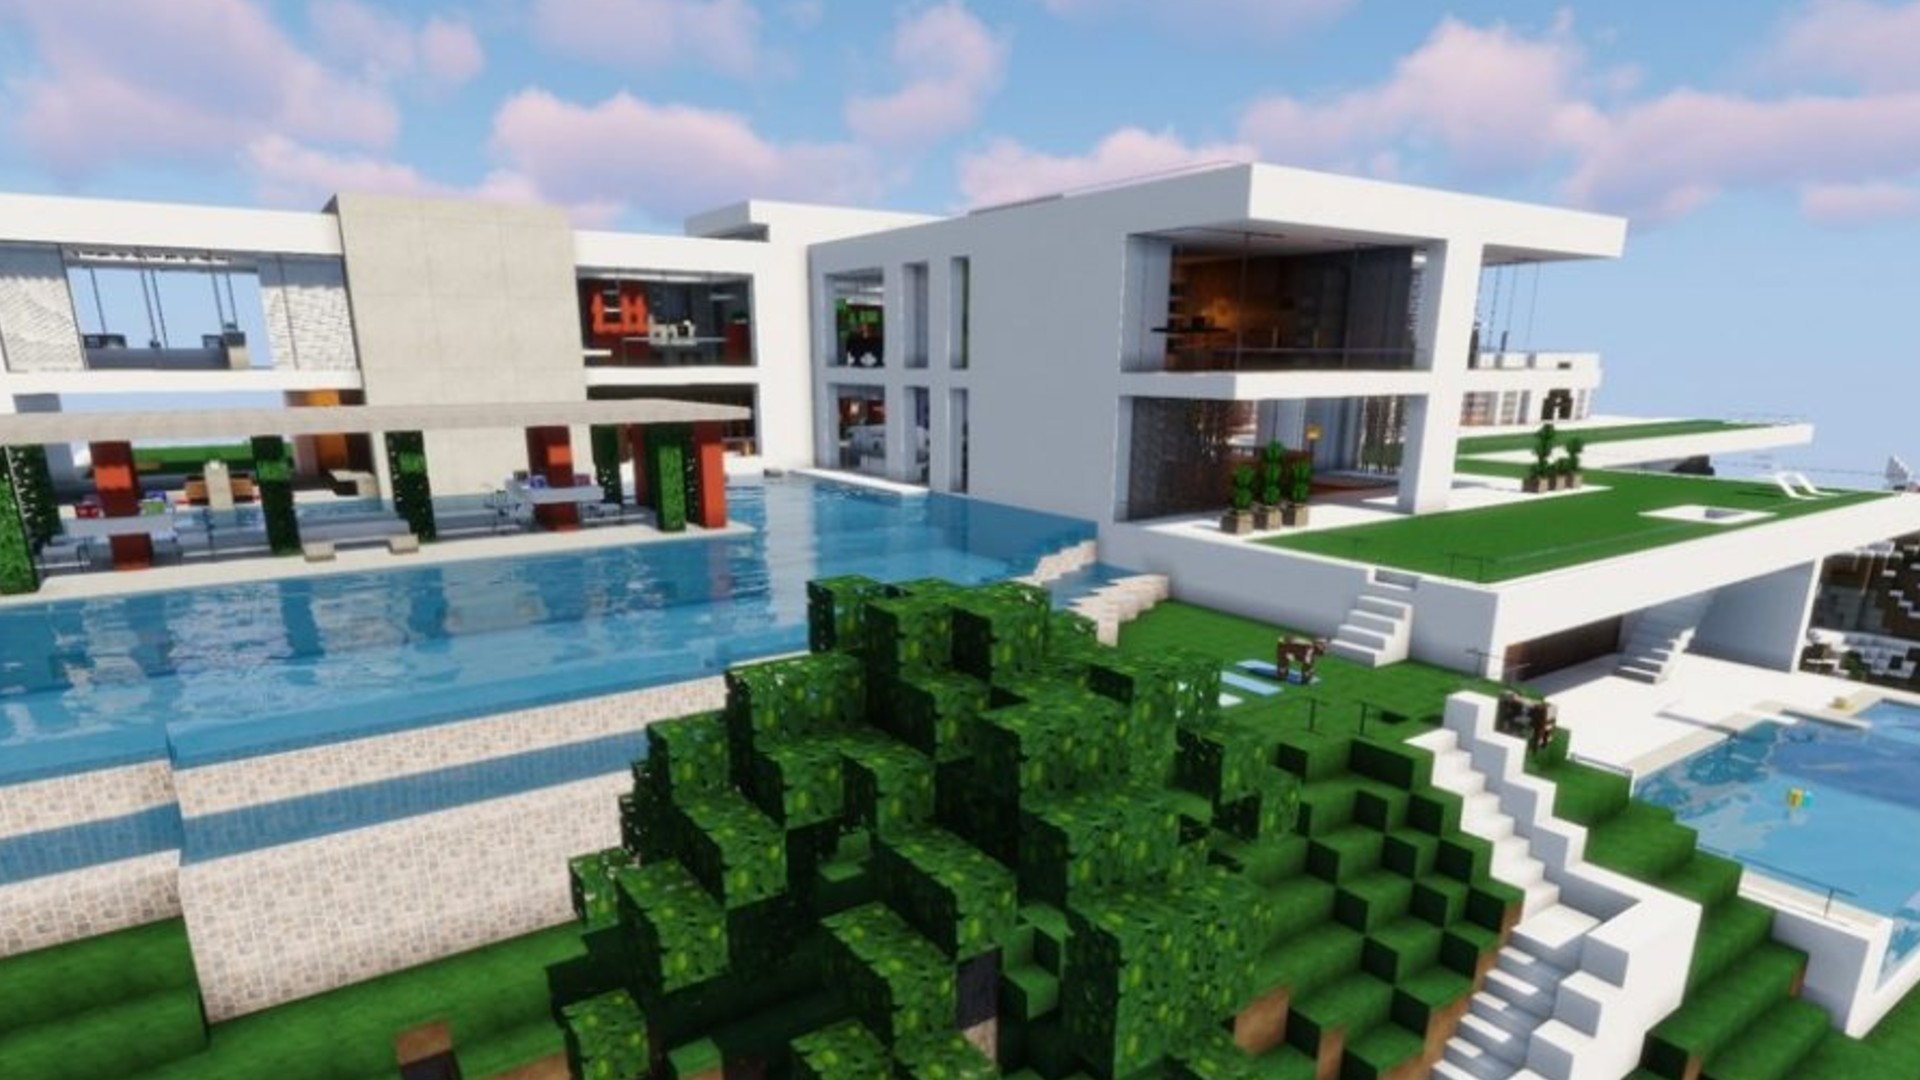 Cool Minecraft house ideas for your next build